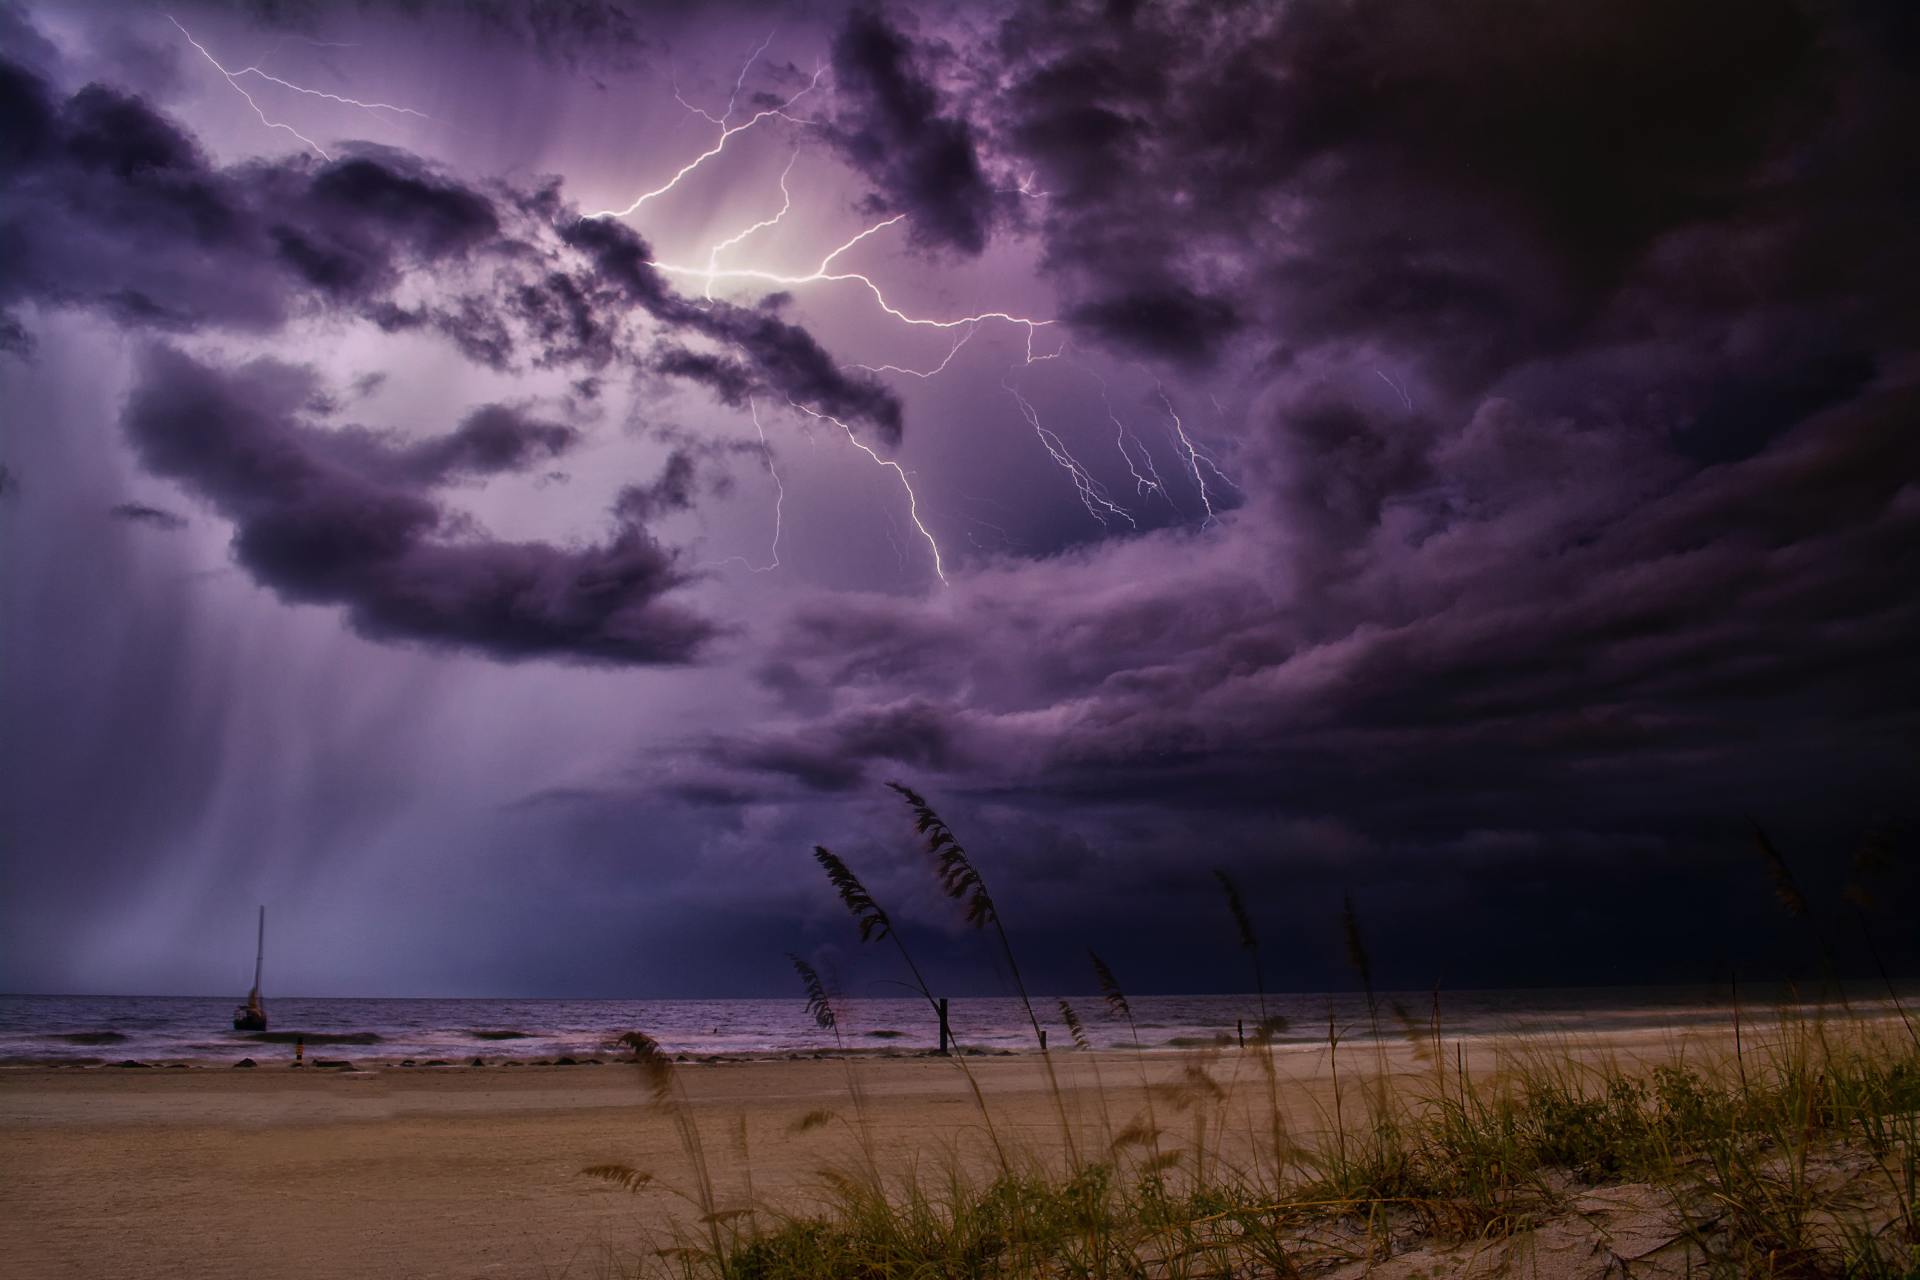 Thunderstorm and lightning approach a beach and boat